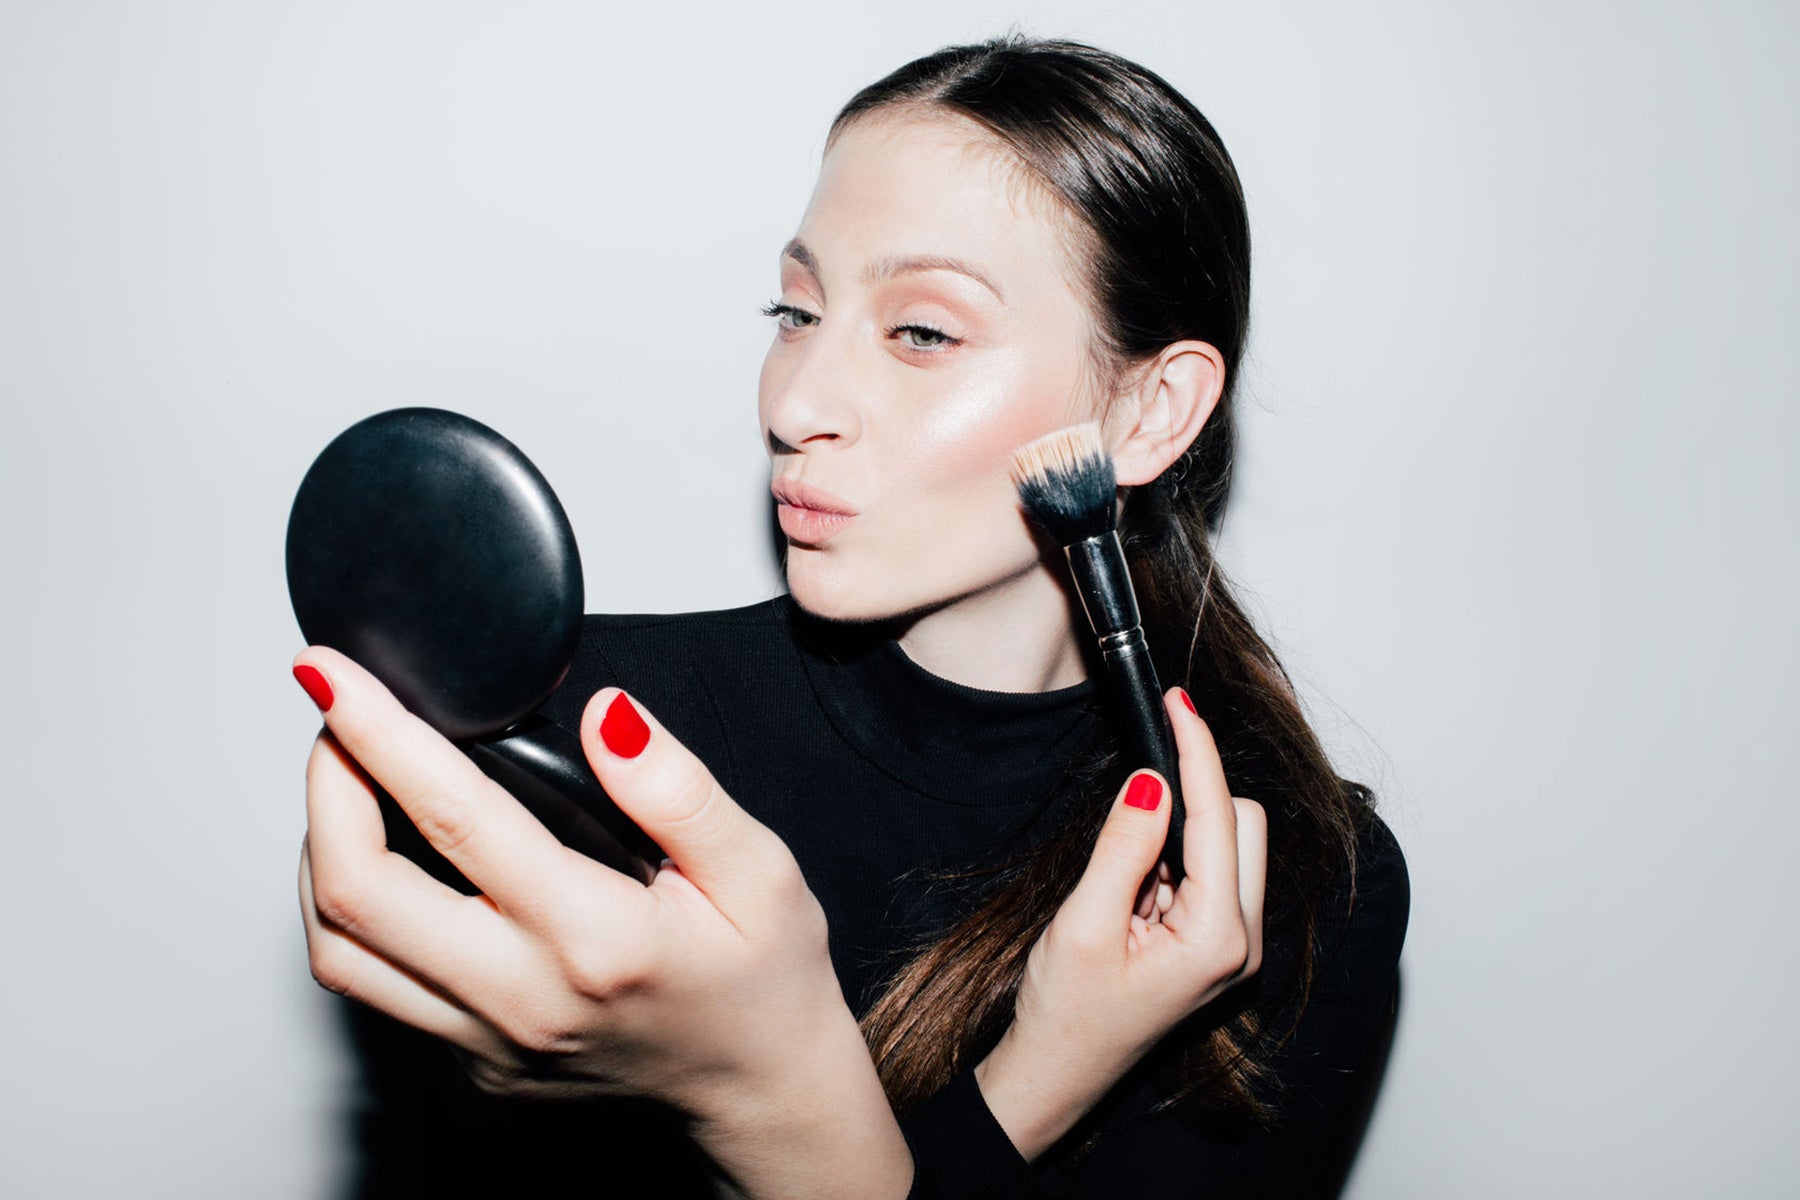 How cheeky — A guide to cheek makeup & brushes